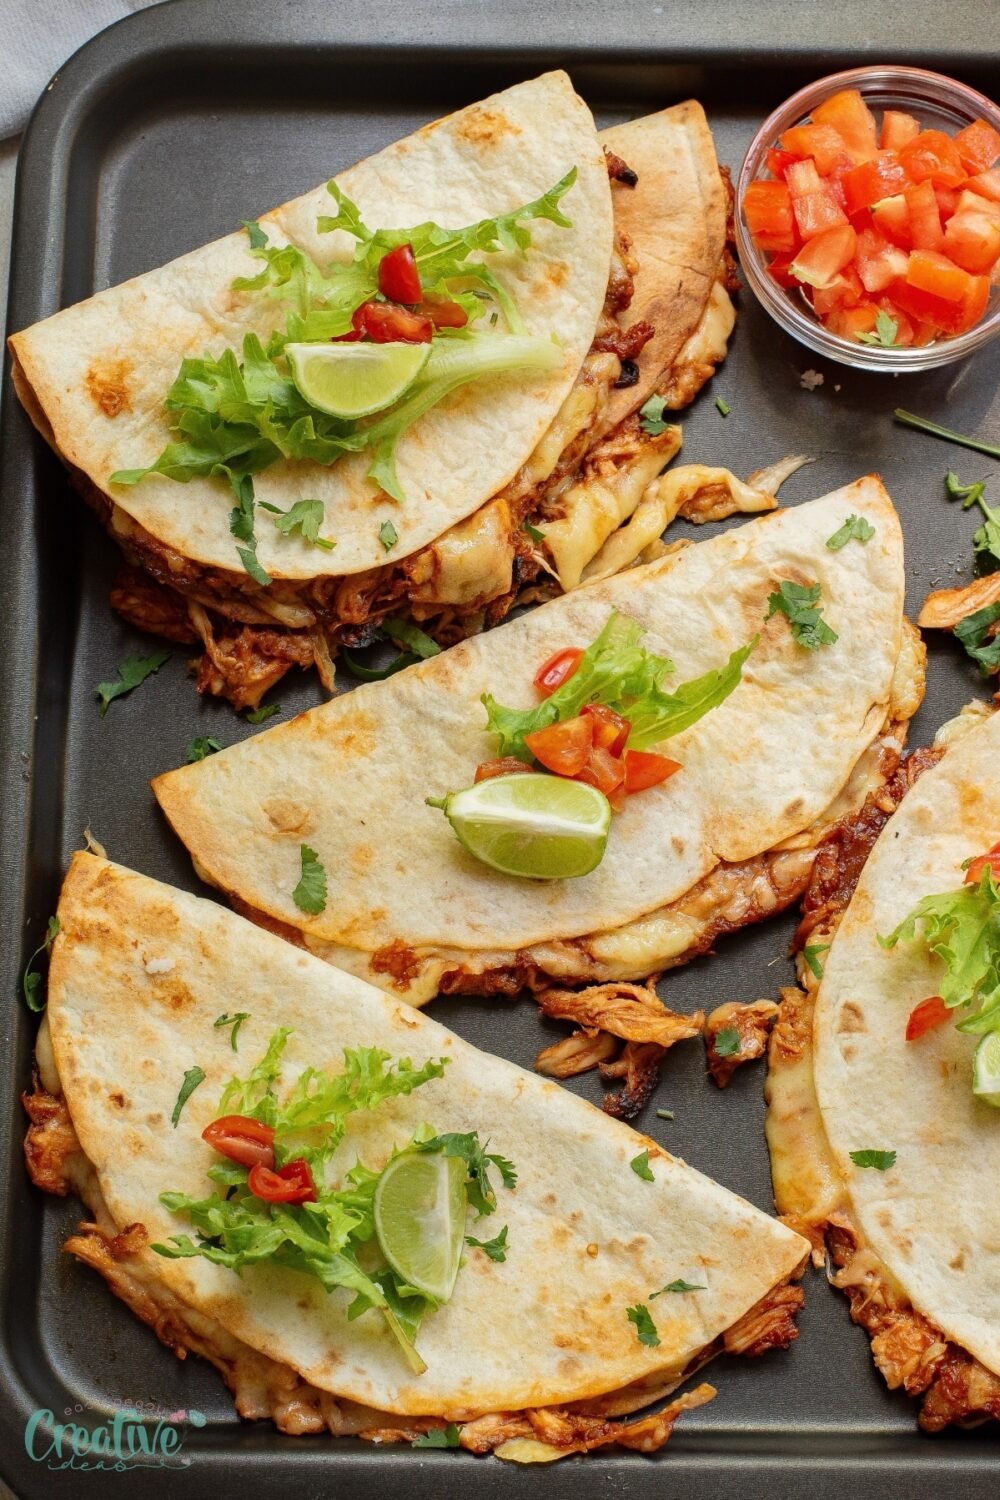 Try these baked BBQ chicken tacos for a tasty and exciting change from the usual taco night!